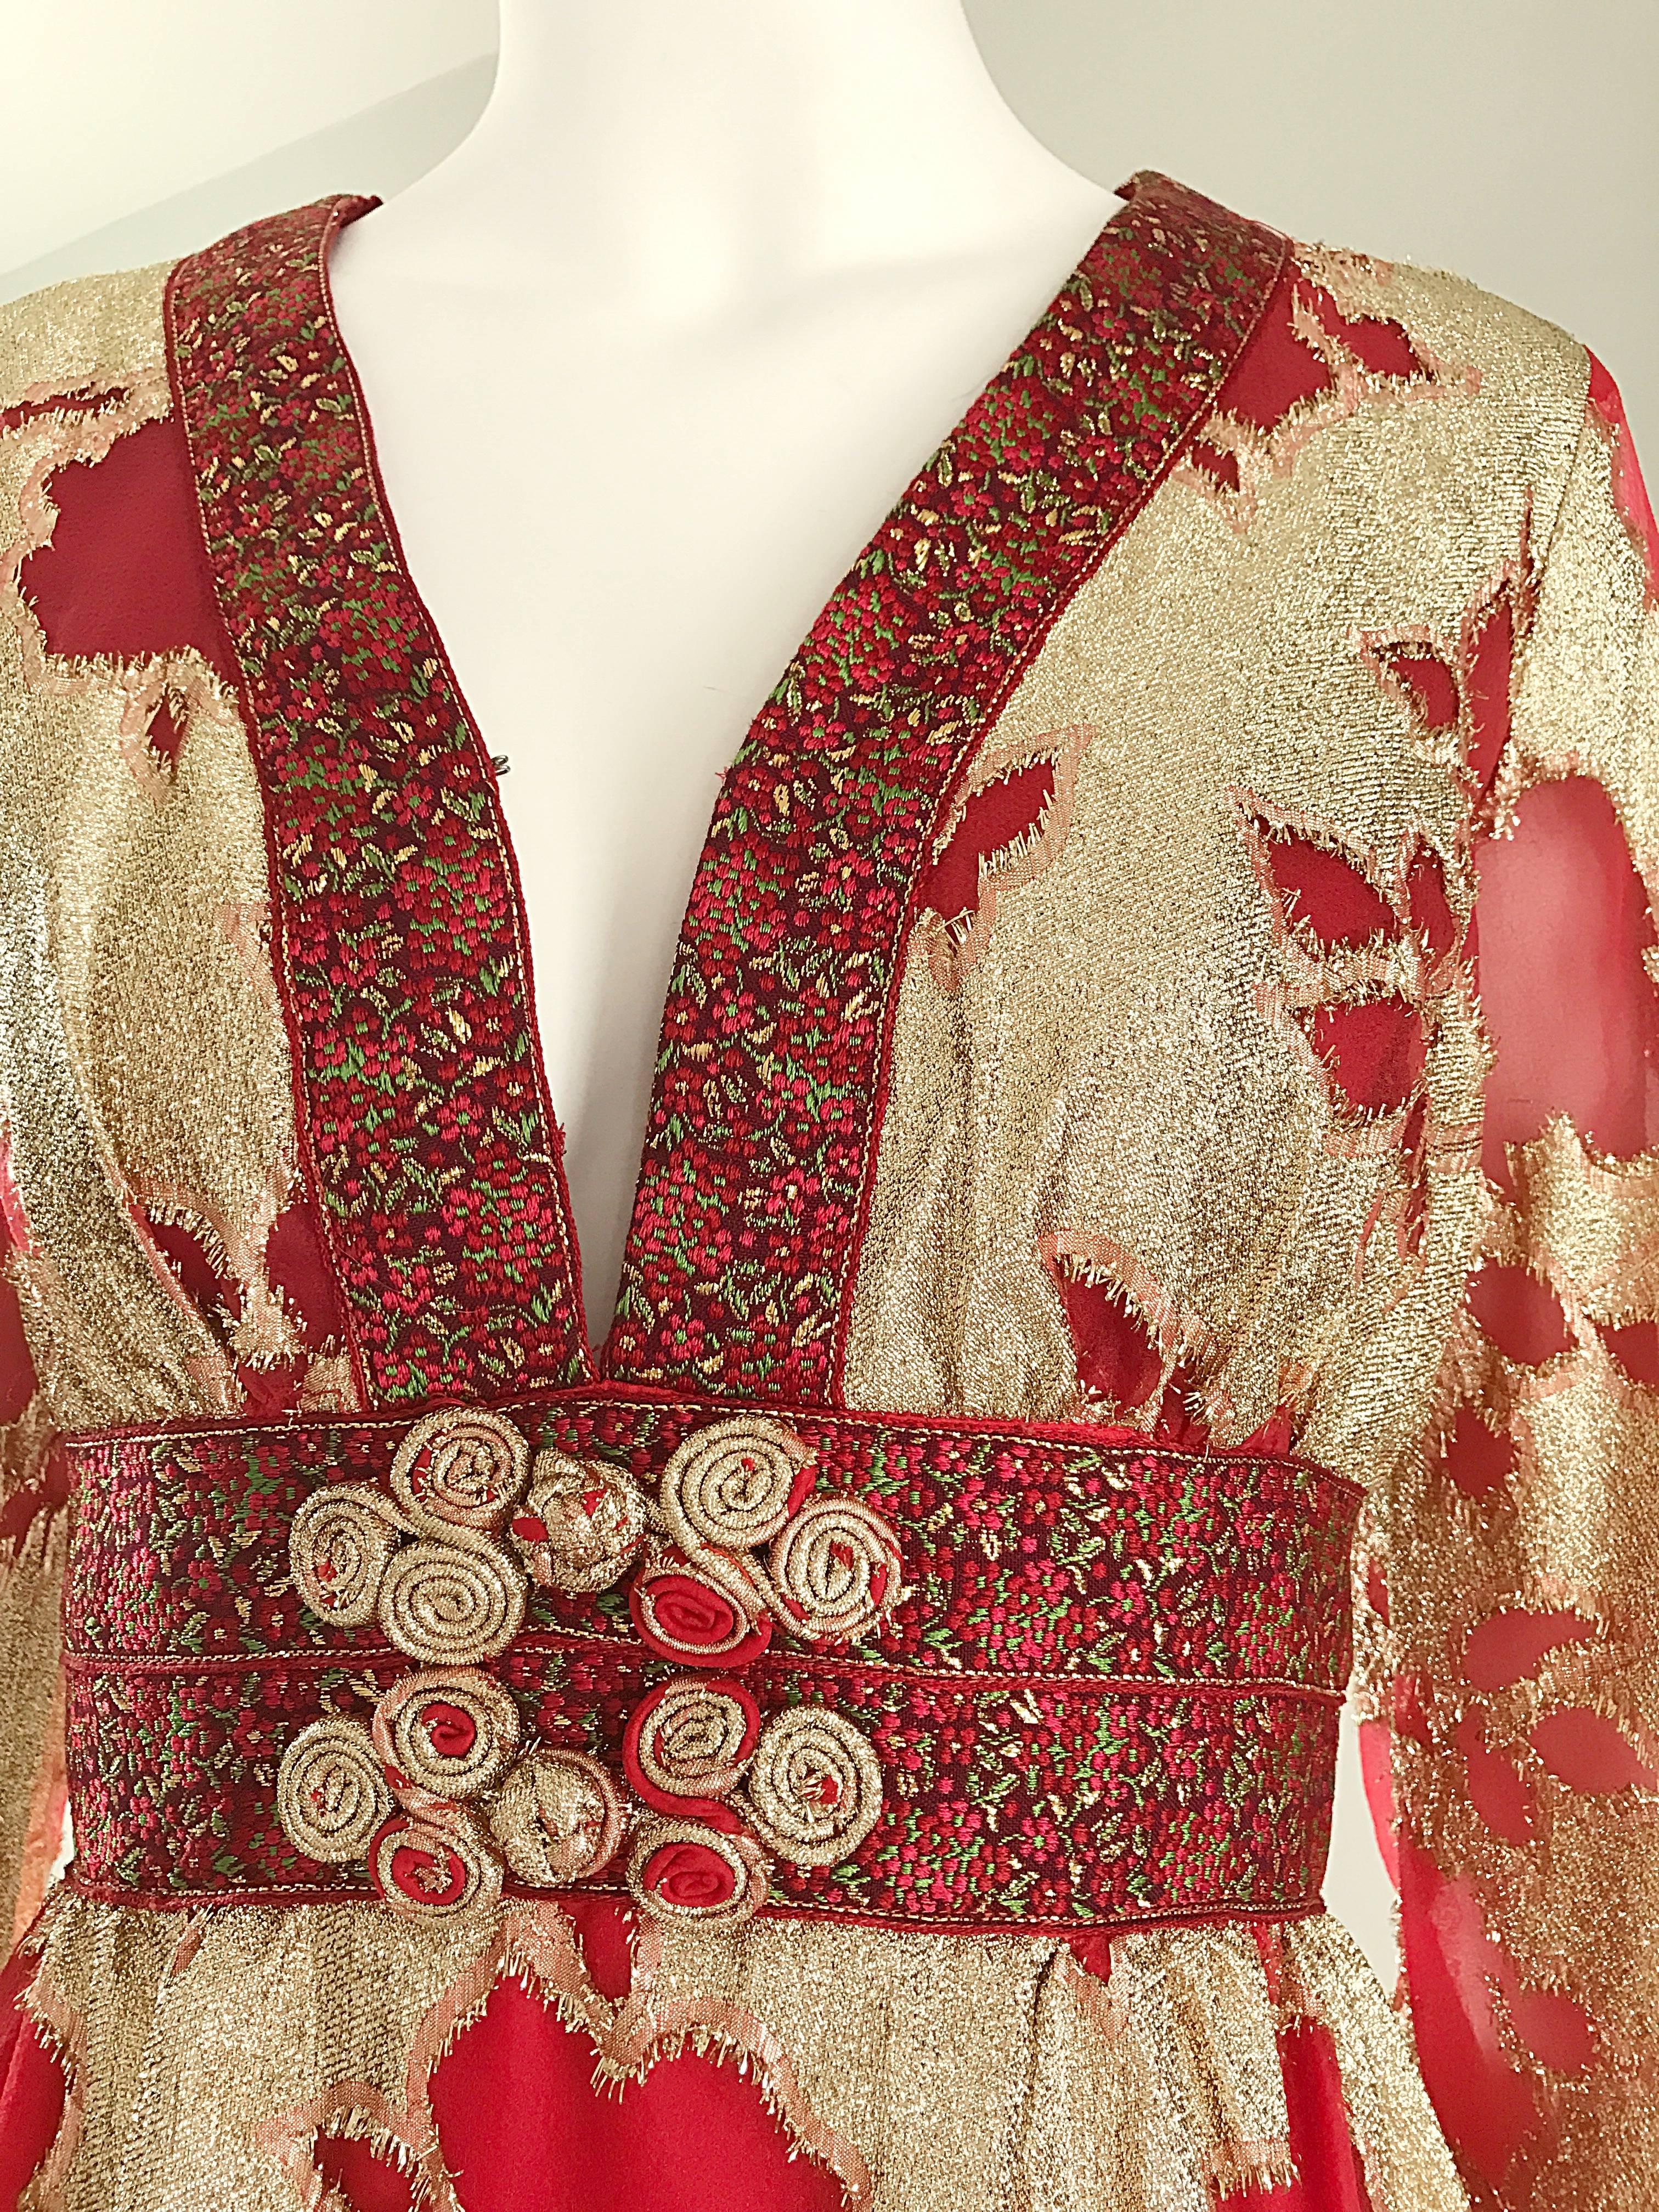 Bill Blass Vintage Red and Gold Silk Lurex Asian Inspired Gown, 1970s  In Excellent Condition For Sale In San Diego, CA